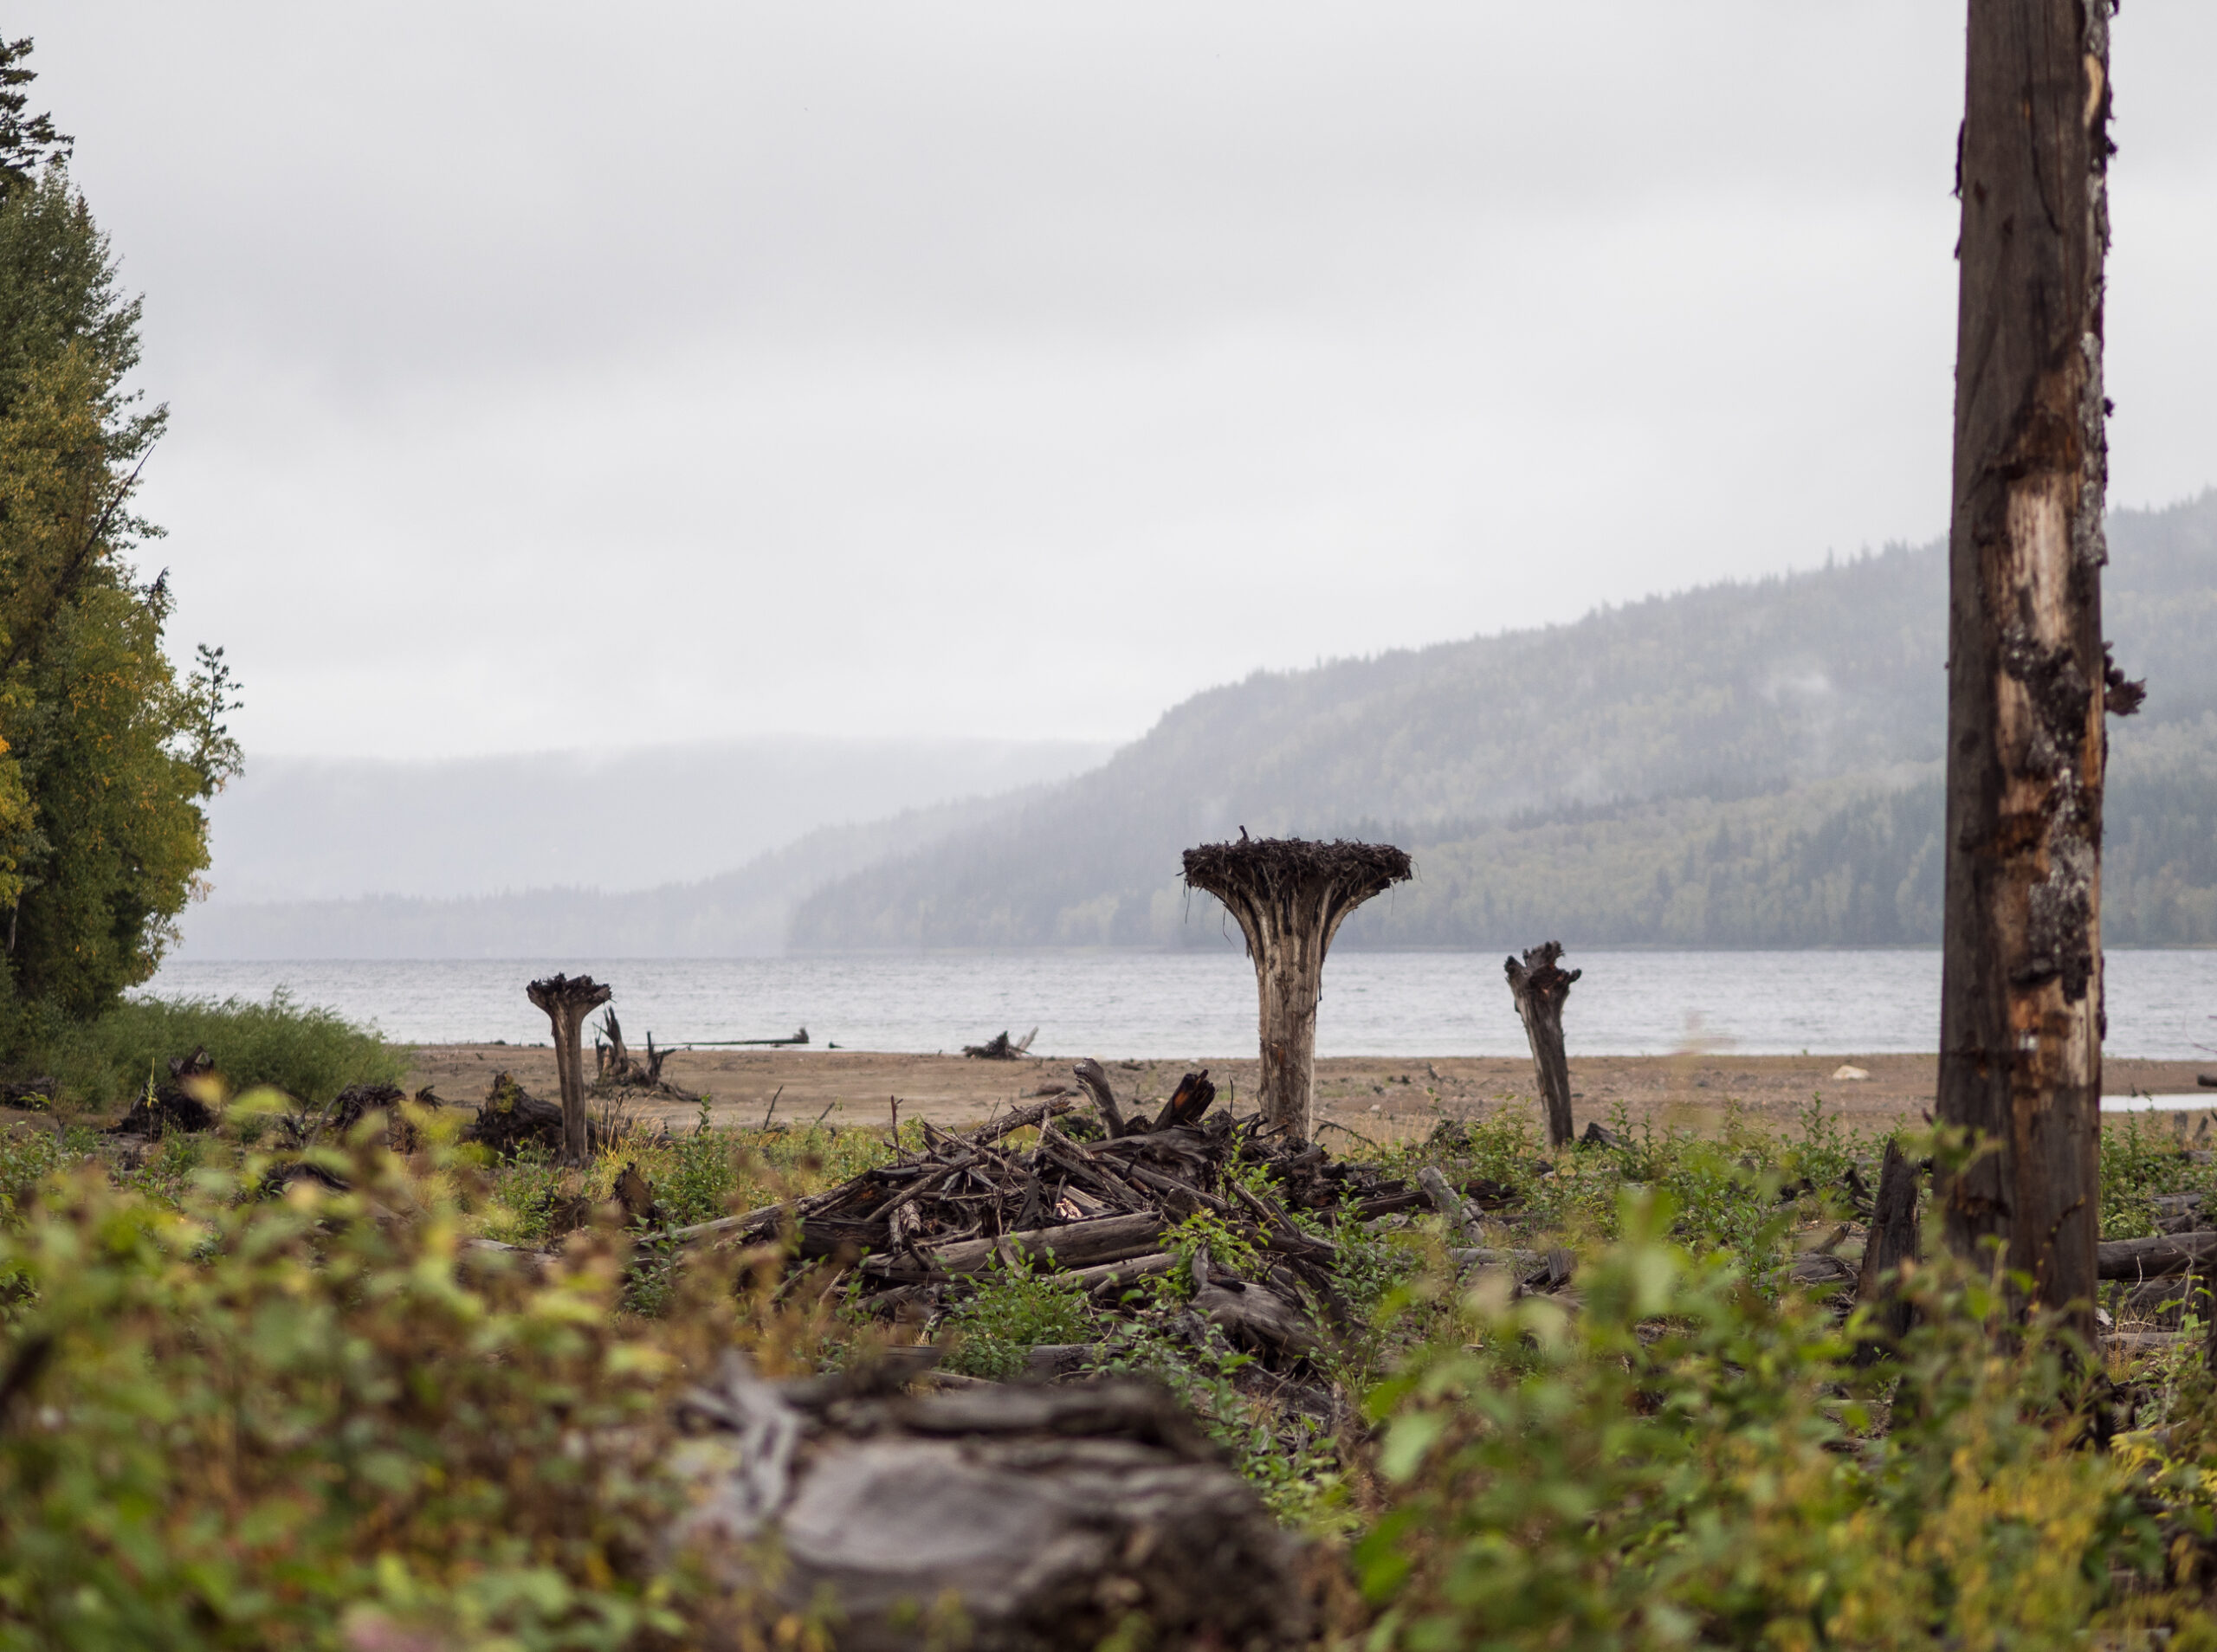 Upturned trees, placed in the ground in an effort to provide perches for birds of prey as part of remediation work at the mouth of Hazeltine Creek after the Mount Polley mine spill.